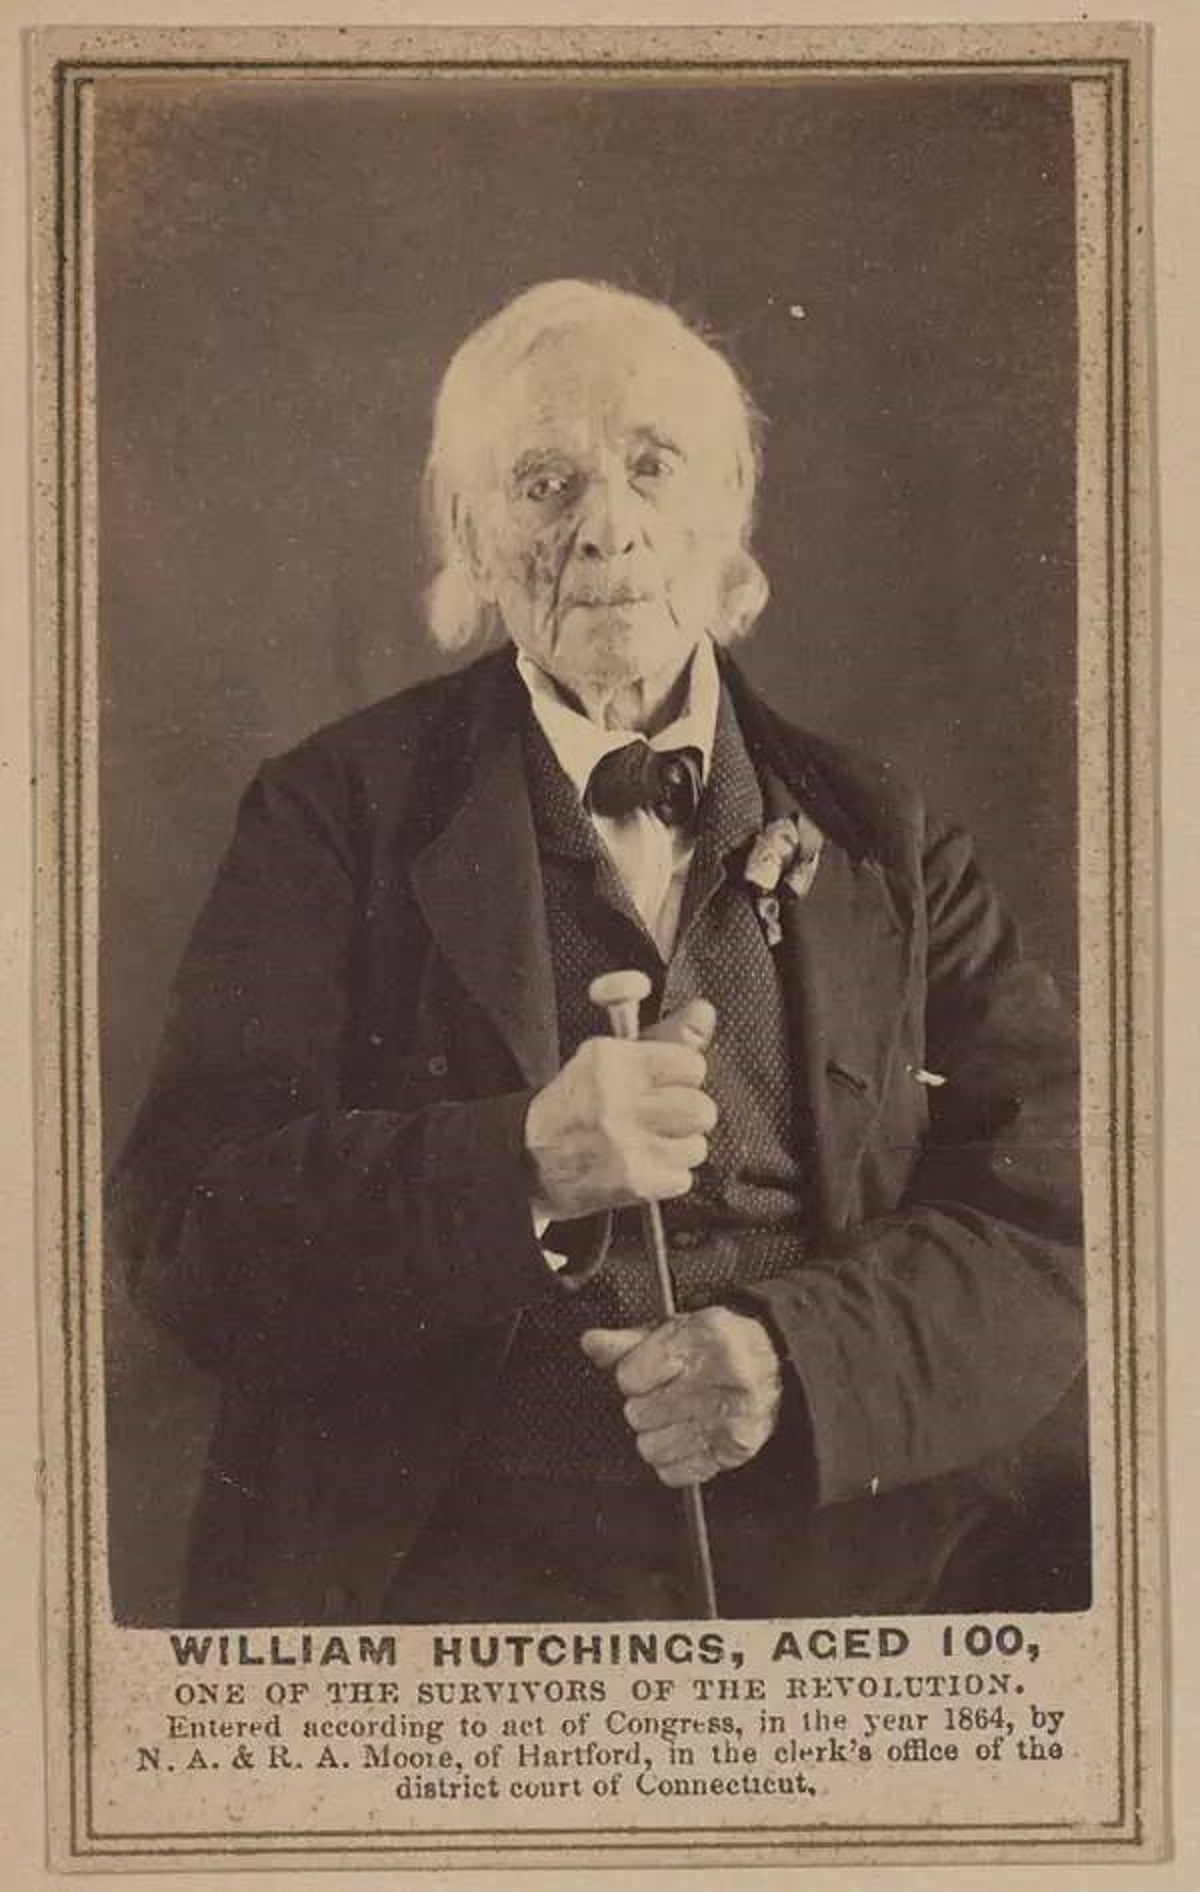 fascinating photos - revolutionary war veterans - William Hutchings, Aced 100, One Of The Survivors Of The Revolution. Entered according to act of Congress, in the year 1864, by N. A. & R. A. Moore, of Hartford, in the clerk's office of the district court